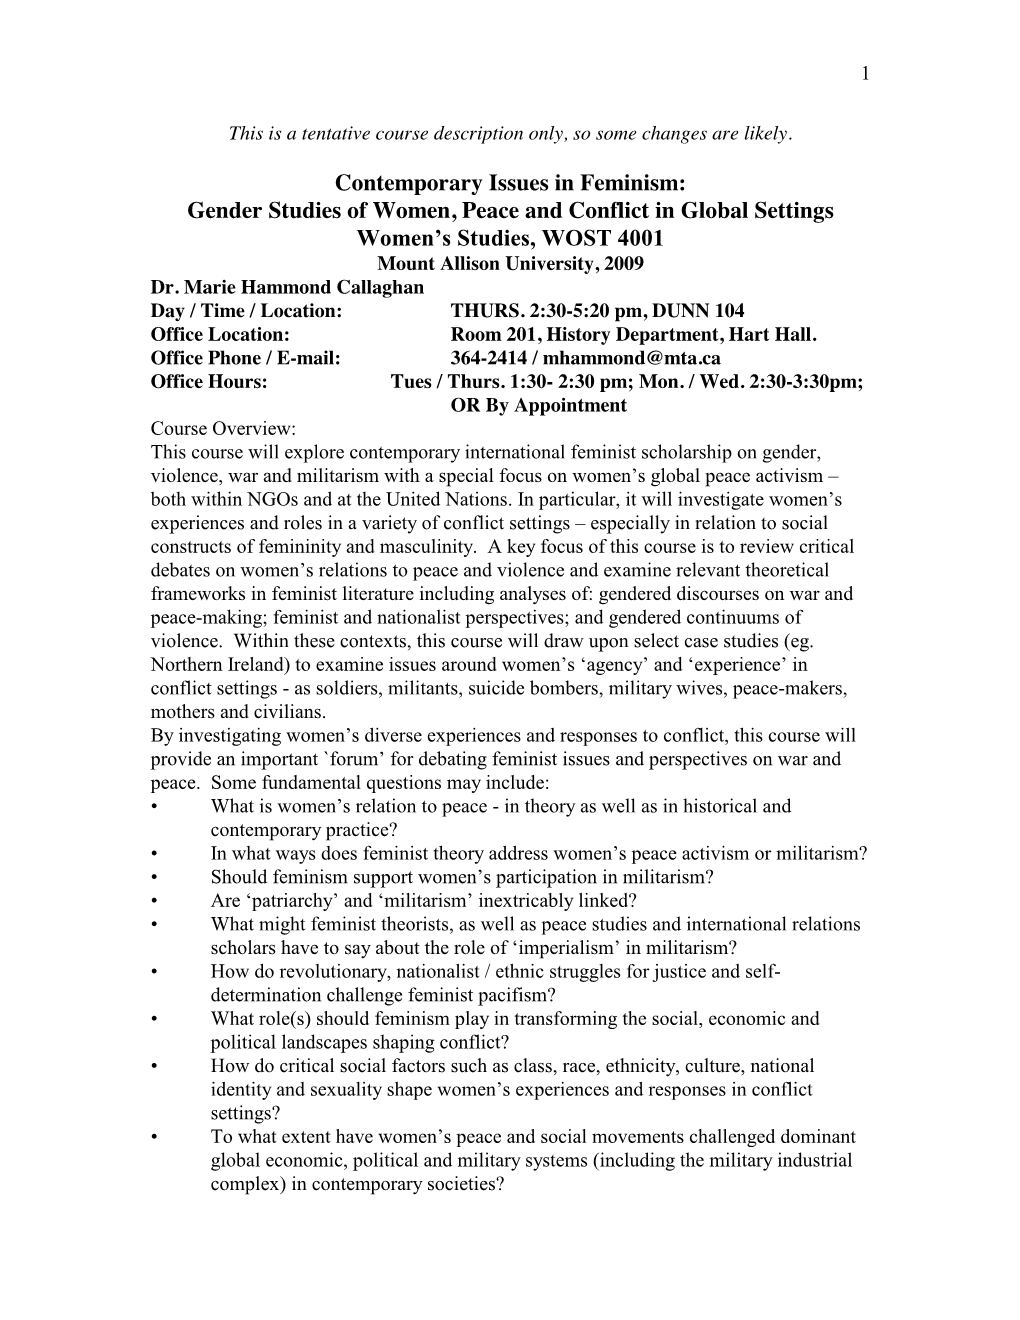 Contemporary Issues in Feminism: Gender Studies of Women, Peace and Conflict in Global Settings Women’S Studies, WOST 4001 Mount Allison University, 2009 Dr